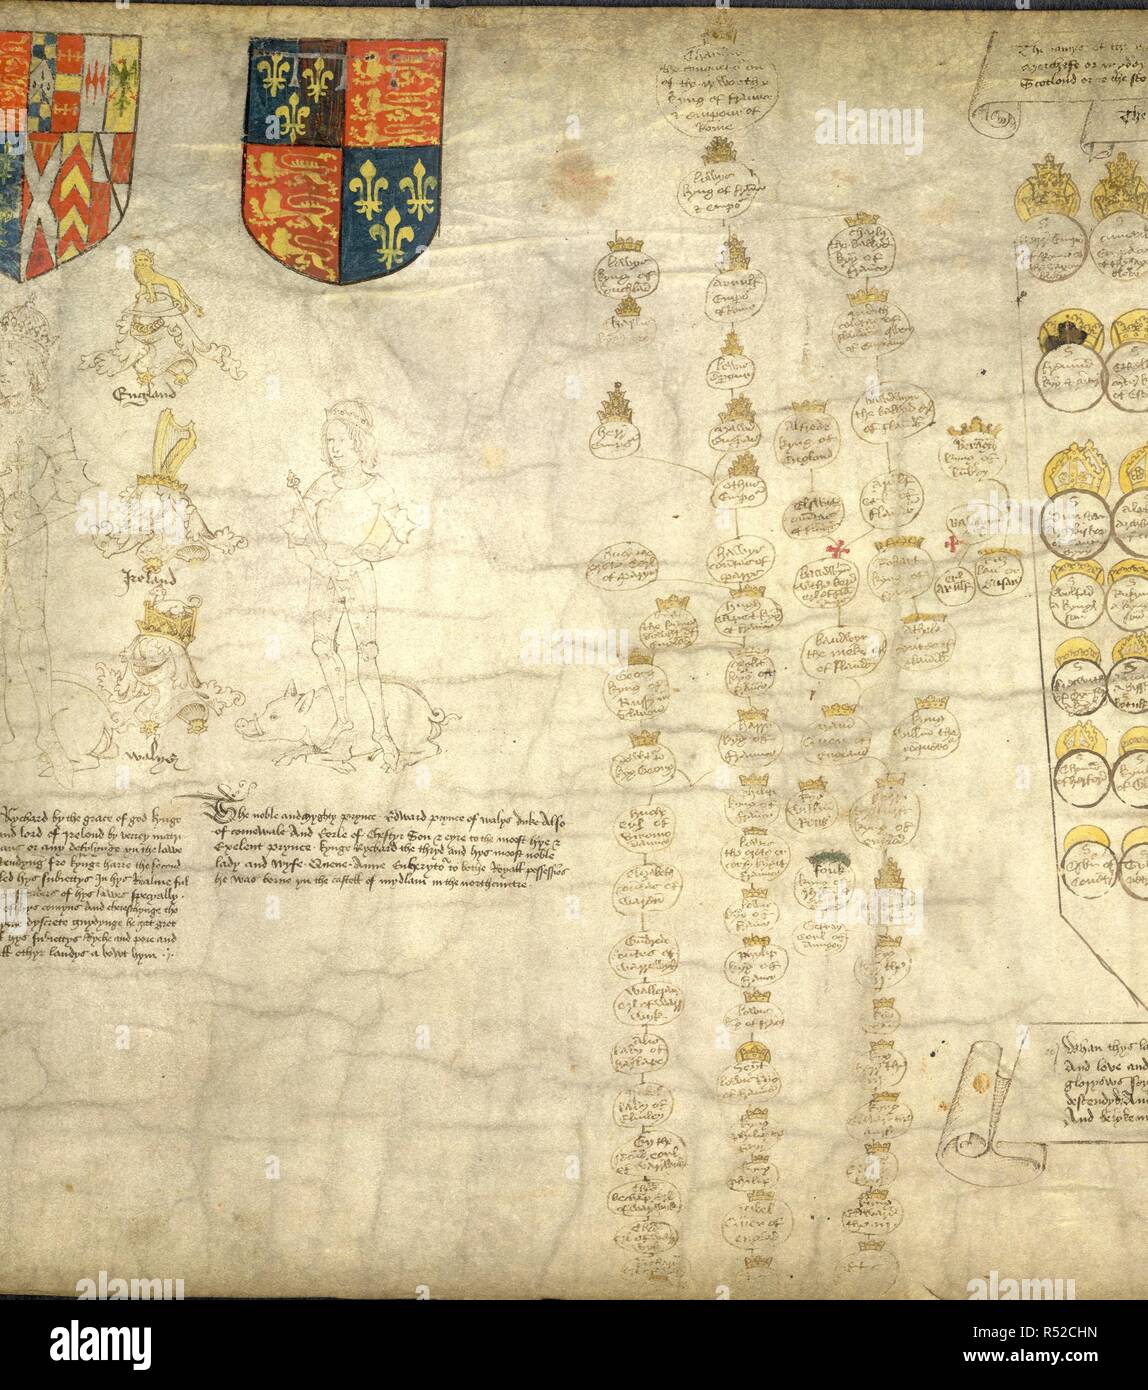 (Main figure) Edward, Prince of Wales, son of Richard III, holding a sceptre, and wearing a crown. He is standing on his father's cognizance of the white boar. Above him, a shield bearing the arms of France and England. (On the right) A partial family tree. . The Rous Roll. Illustrated armorial roll-chronicle by John Rous. England [Warwick]; 1483-1485. Some of the text in the caption is from the original manuscript. Source: Add. 48976 f.66 fig.64. Stock Photo